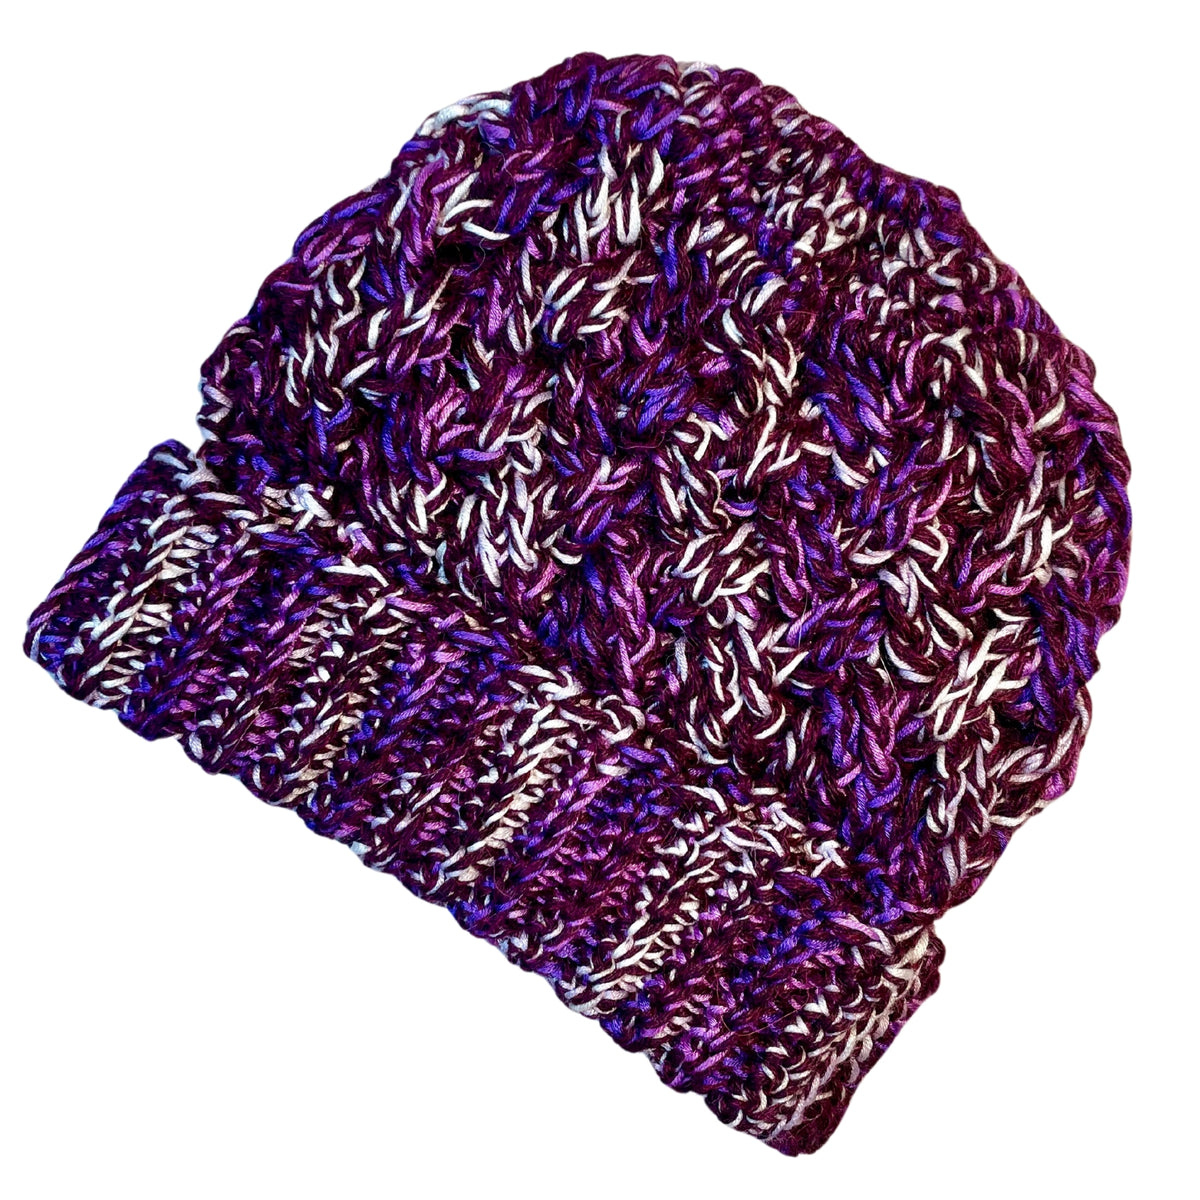 Deep purple, bright purple violet, and white colored cozy soft warm handmade knitted crochet celtic hat made in Montana by Alpacas of Montana.